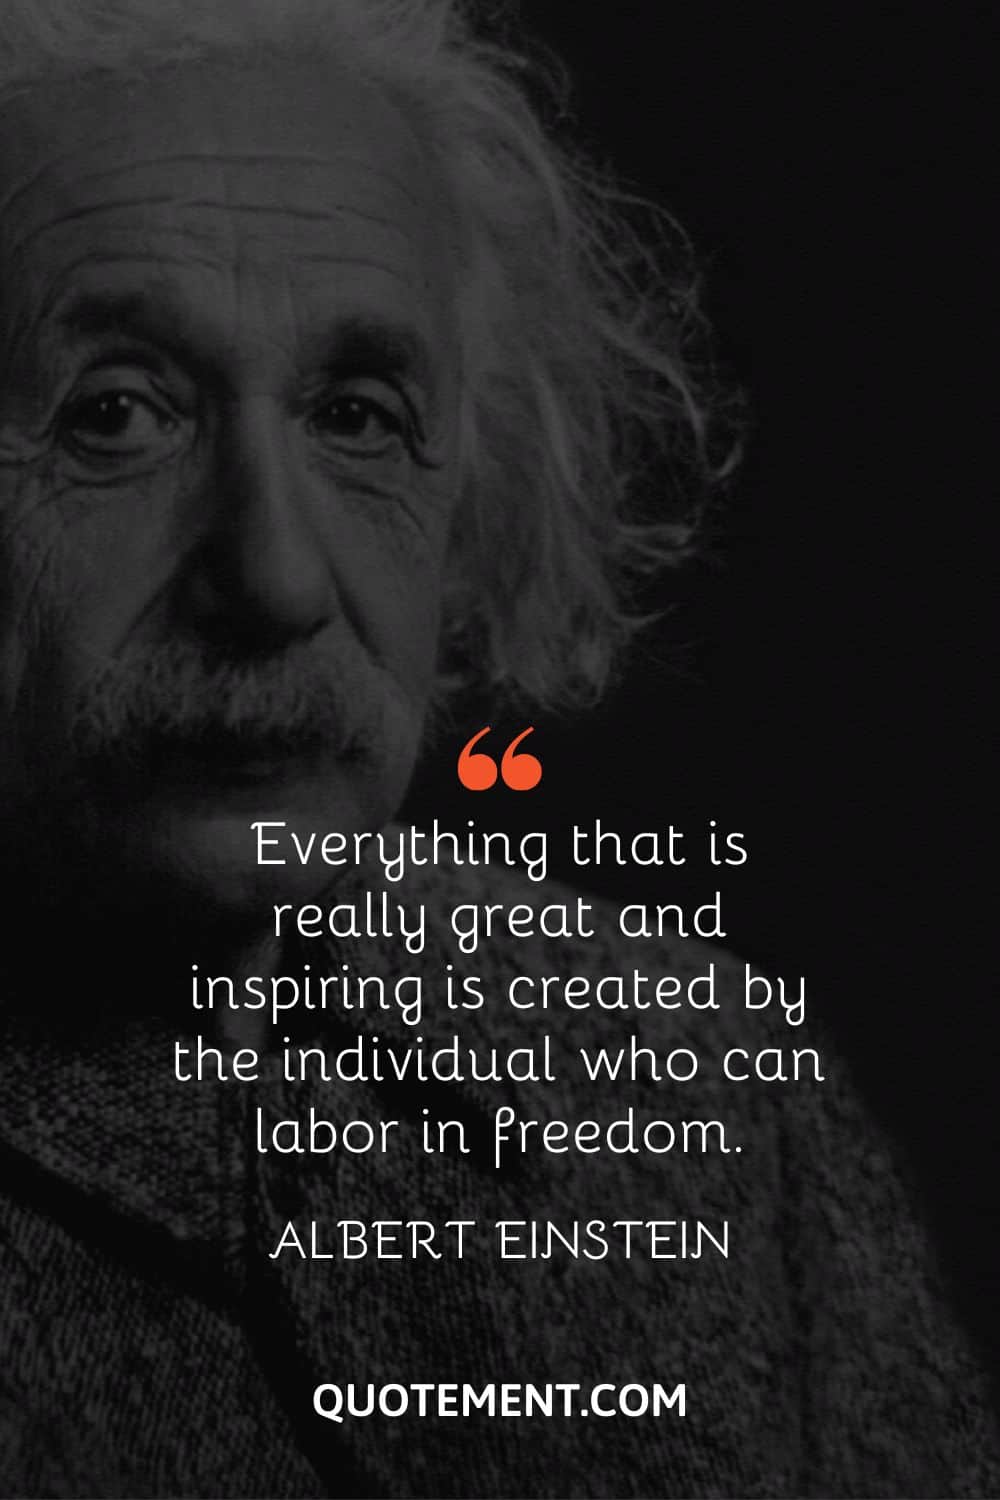 Everything that is really great and inspiring is created by the individual who can labor in freedom